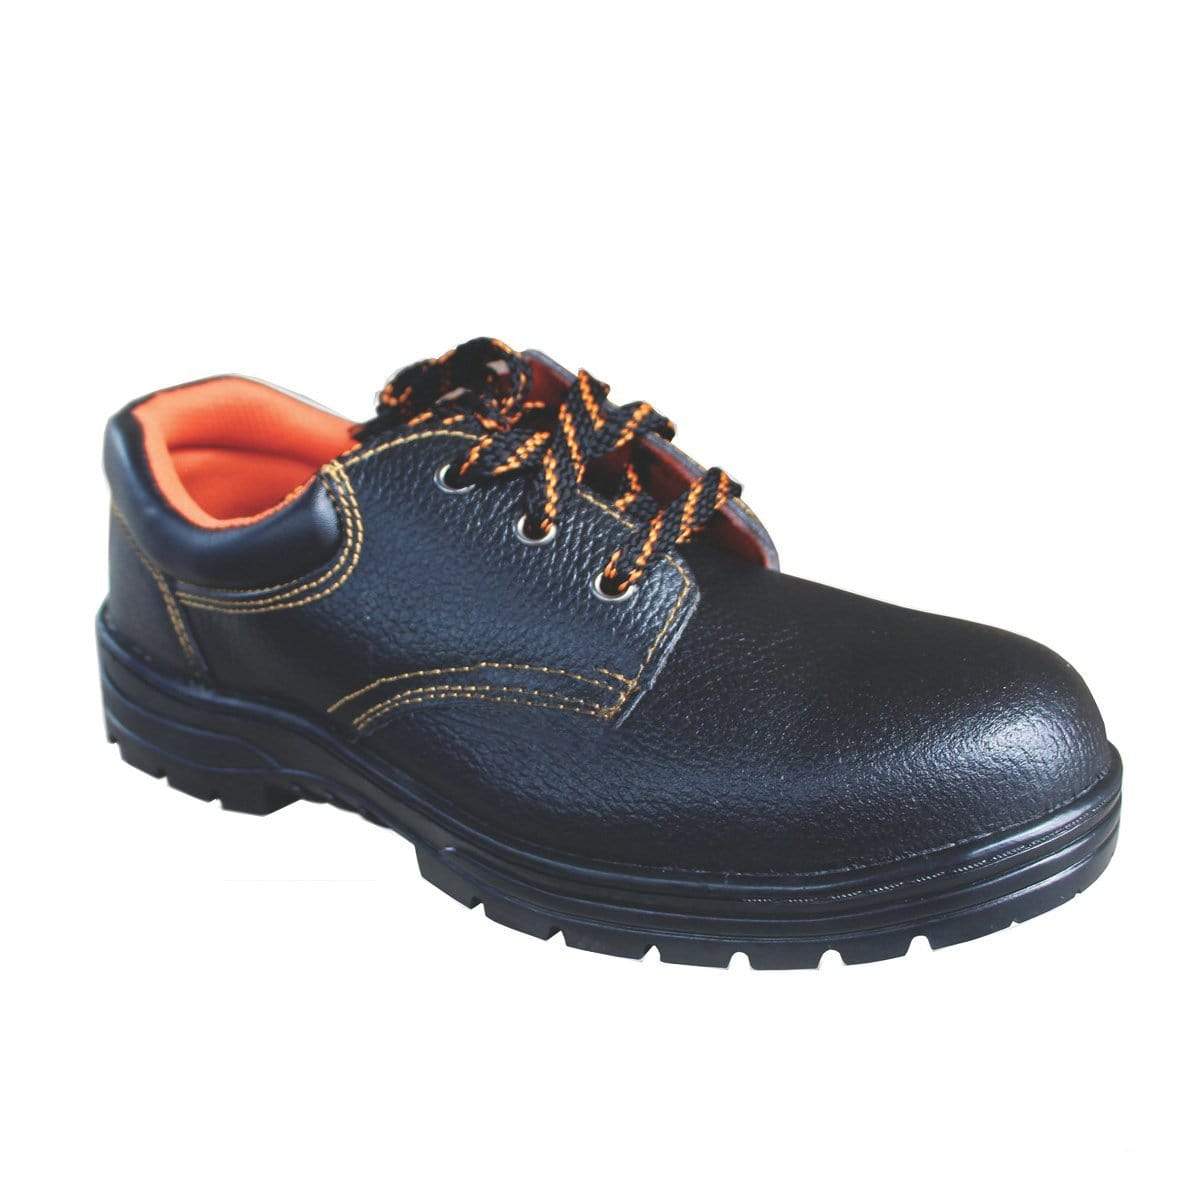 ANEKA Worker Safety Shoes Safety Boots Steel Toe Cap Kasut UK11 1000#